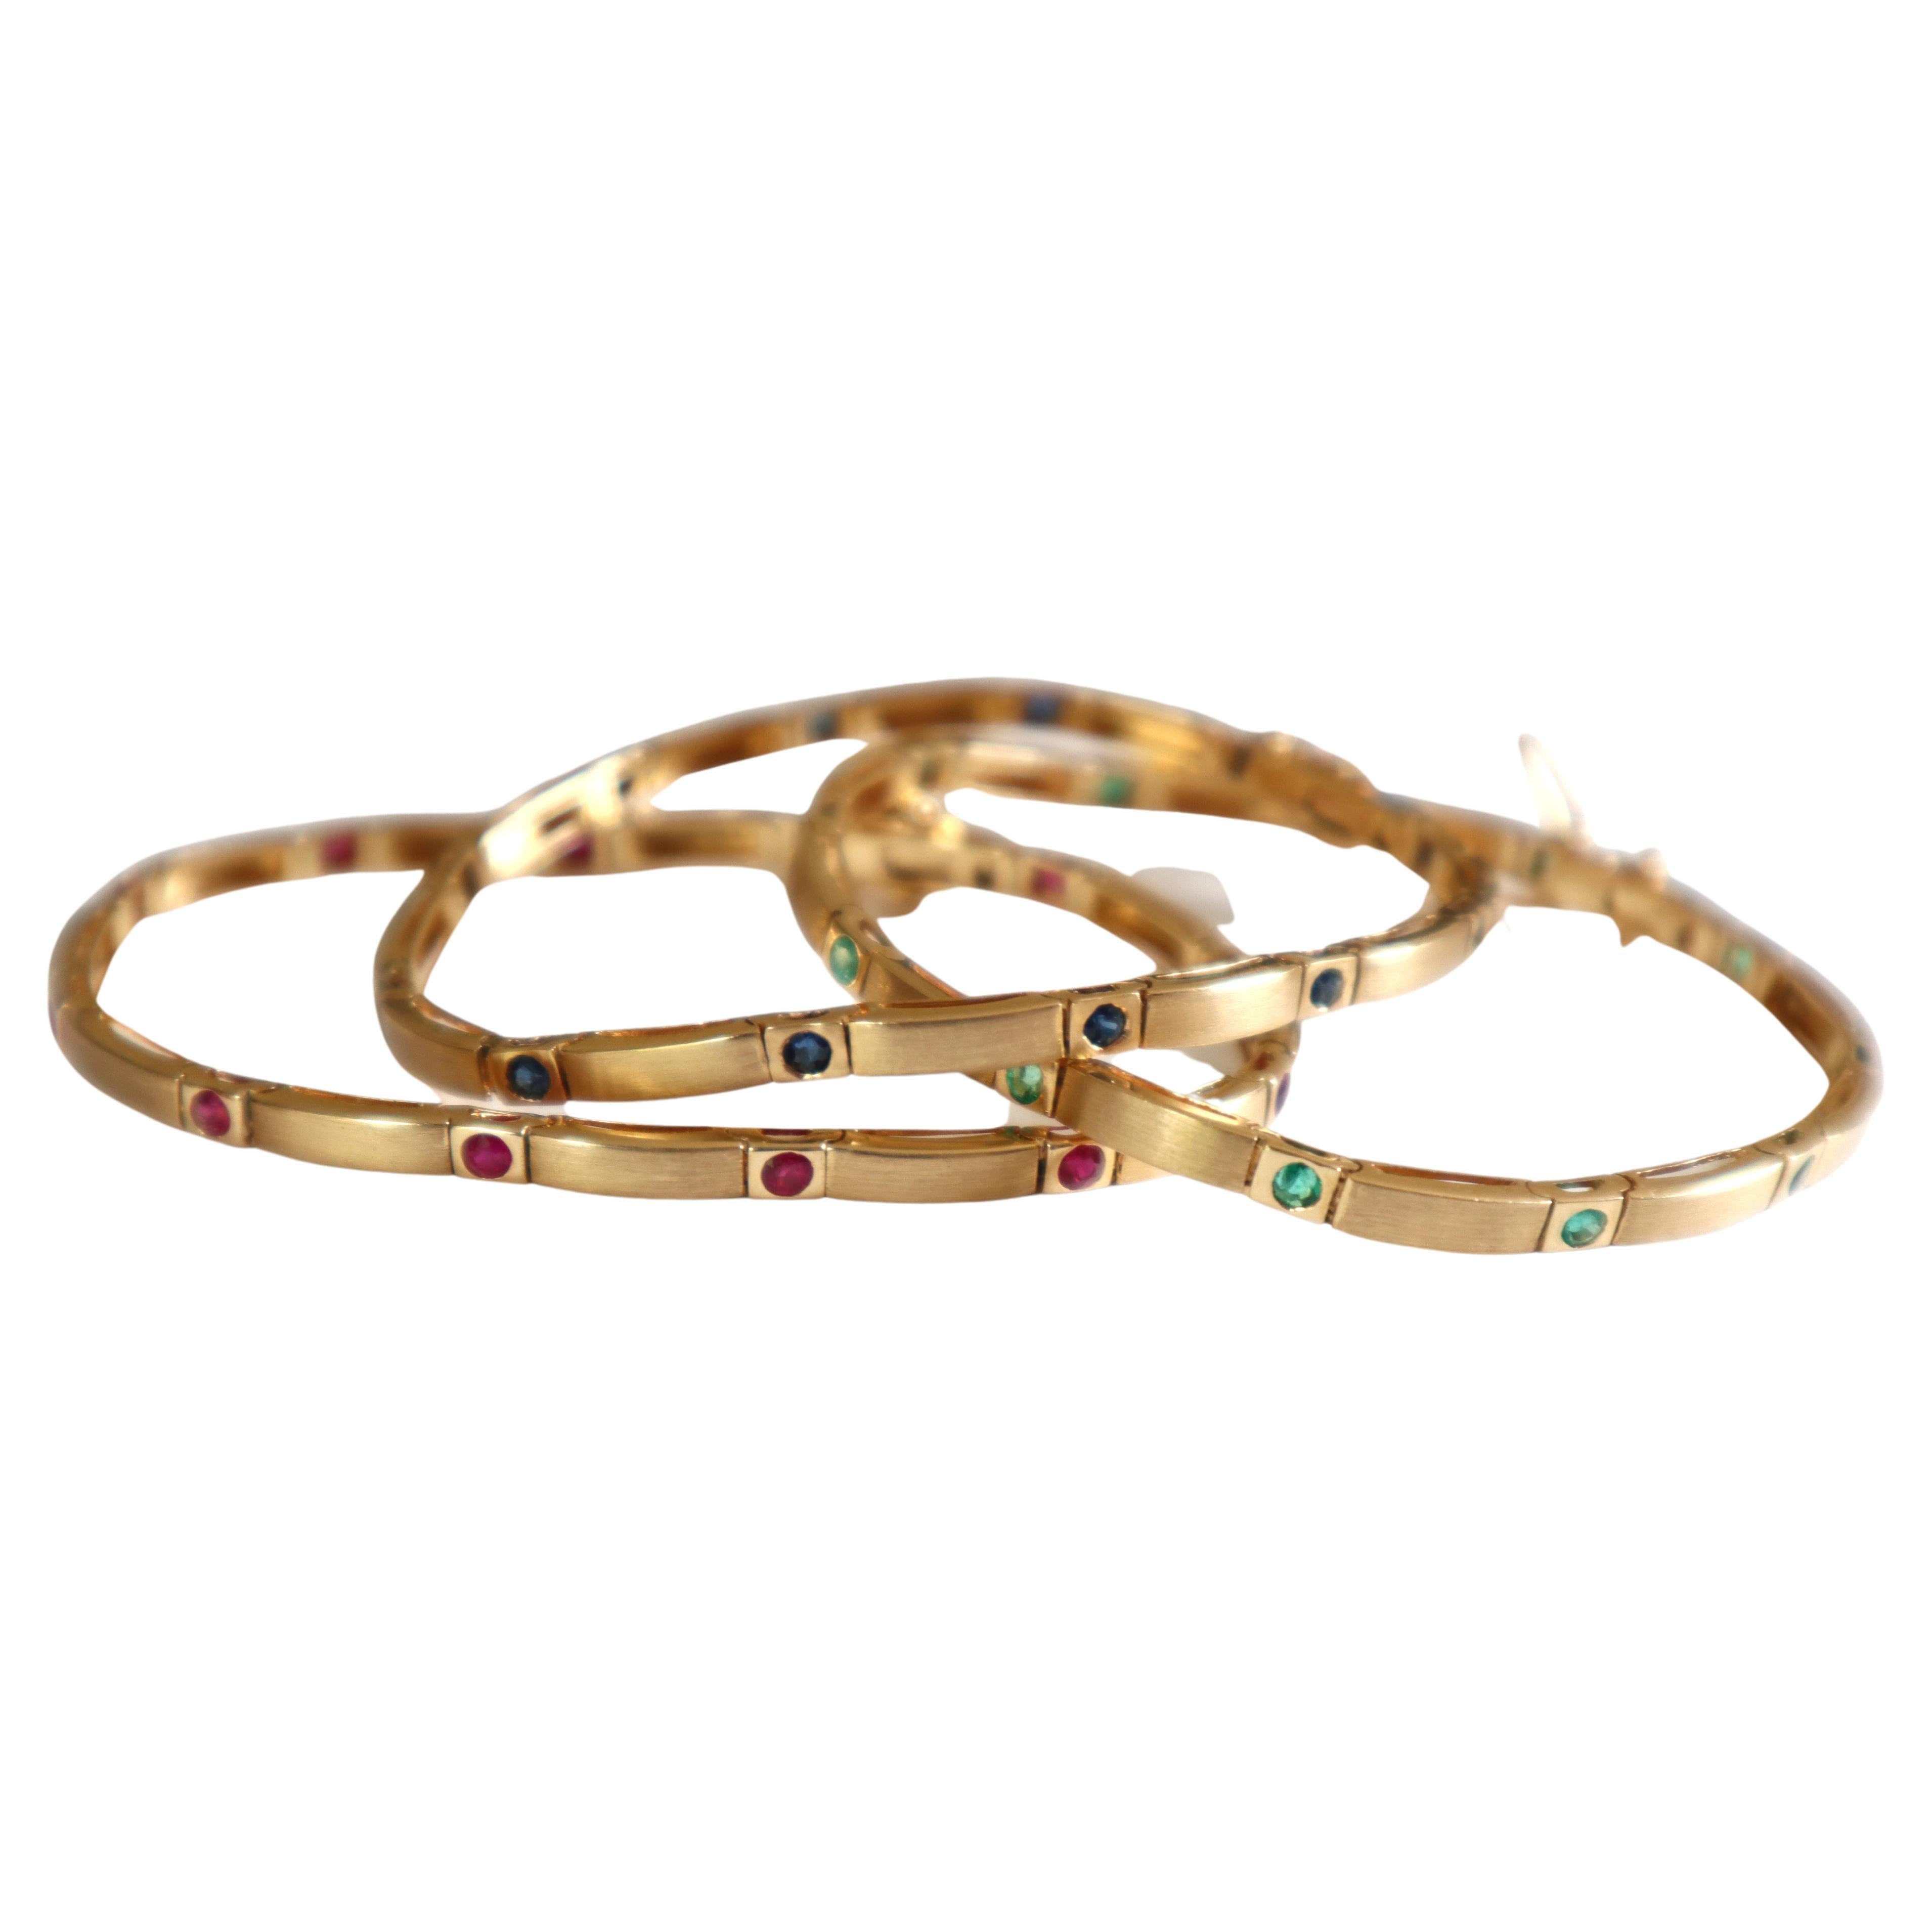 Set of 3 Bracelets in 18 Kt Yellow Satin Gold, Rubies, Emeralds, Sapphires For Sale